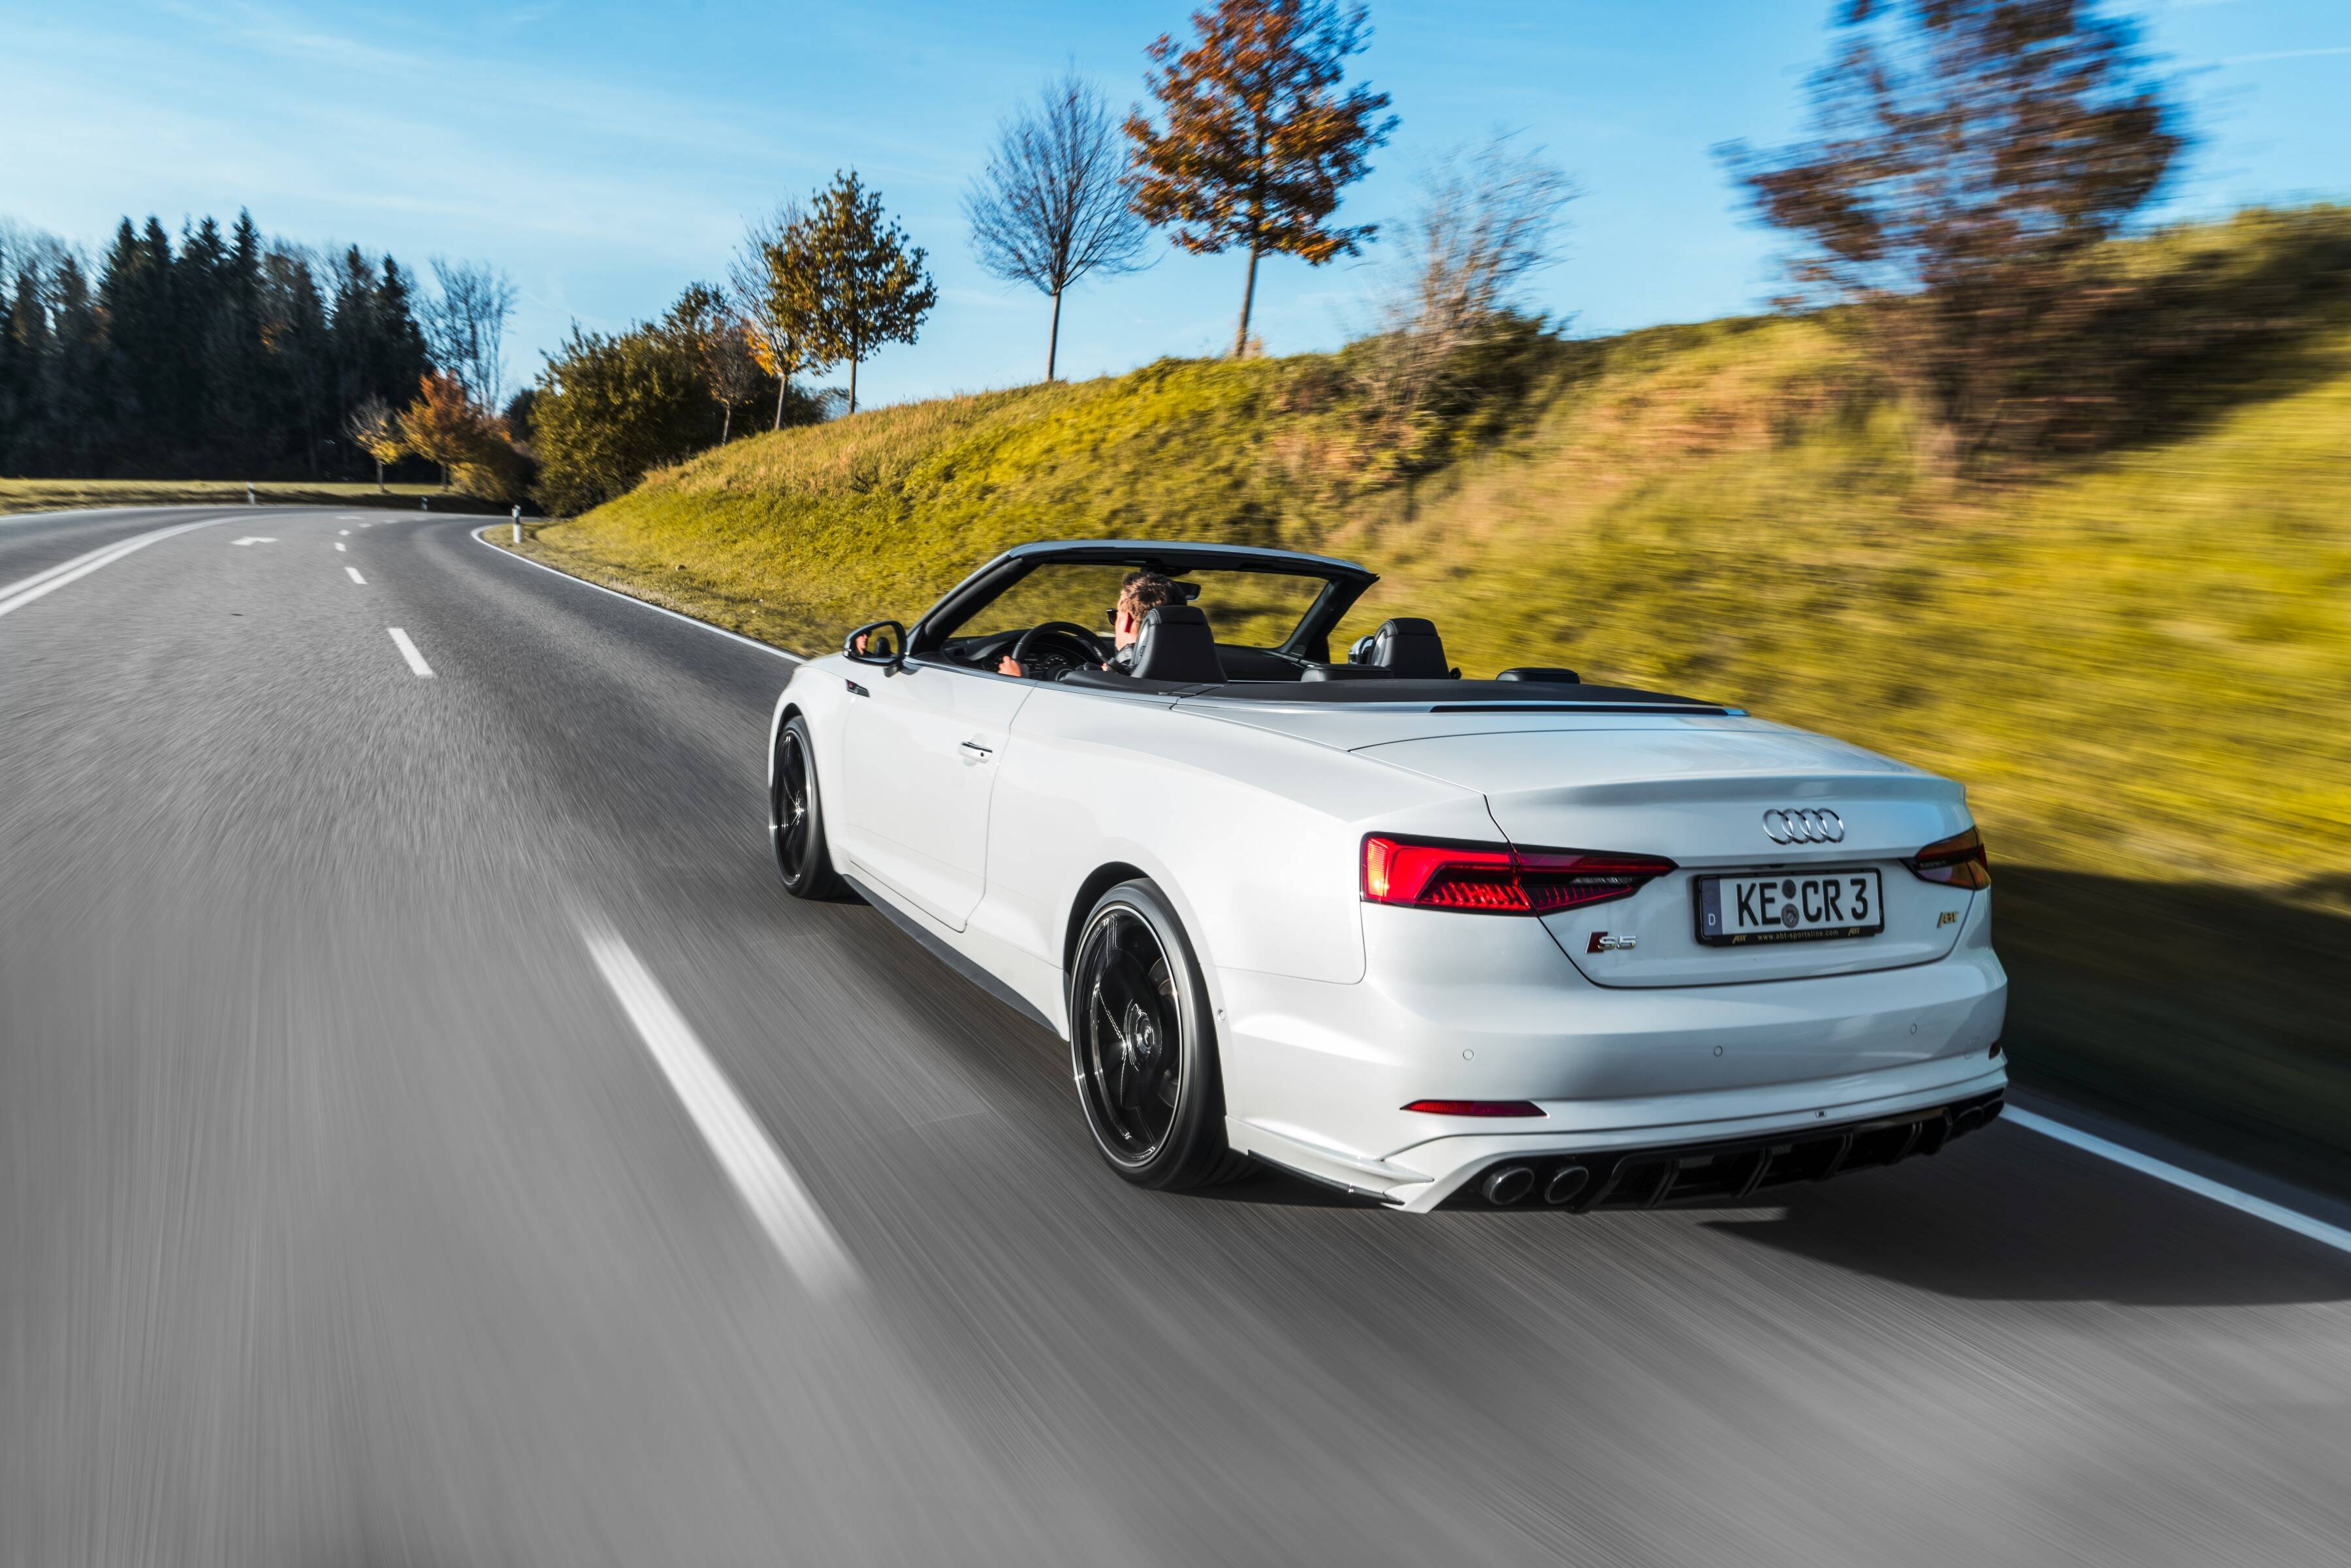 ABT S5 Cabriolet and A5 Sportback rustle the leaves with up to 425 HP - Audi  Tuning, VW Tuning, Chiptuning von ABT Sportsline.